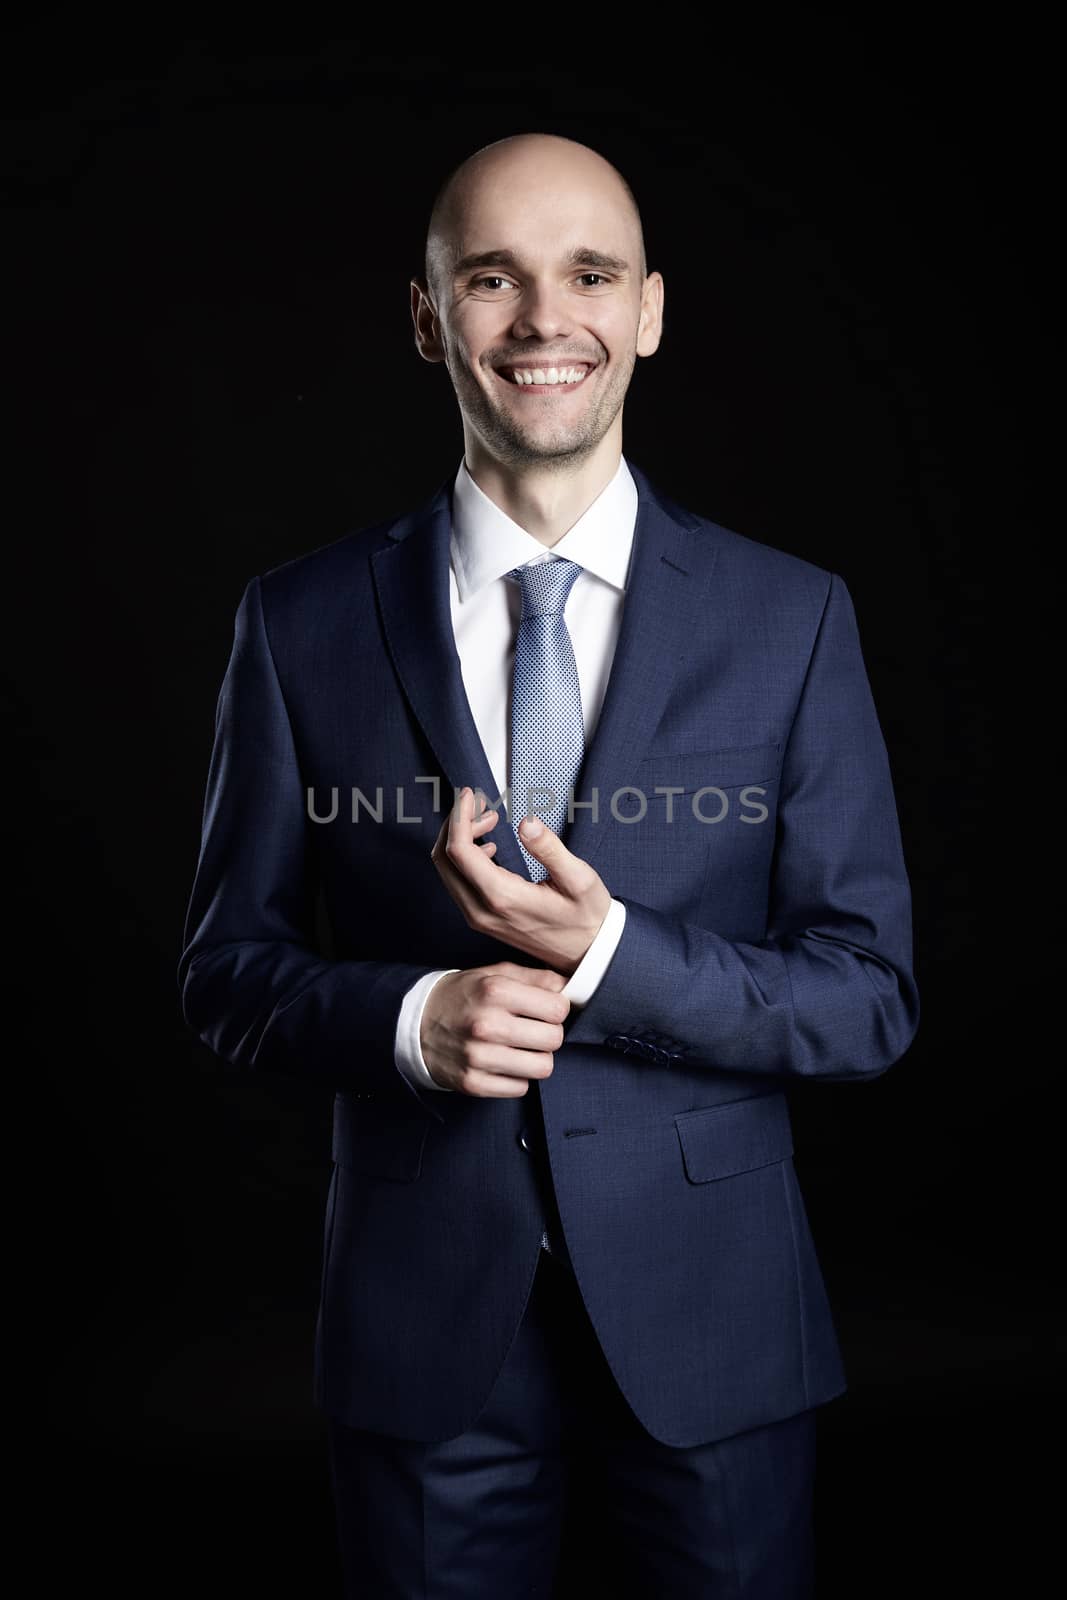 Smiling man fixing cuffs his suit. Studio shot of black background.